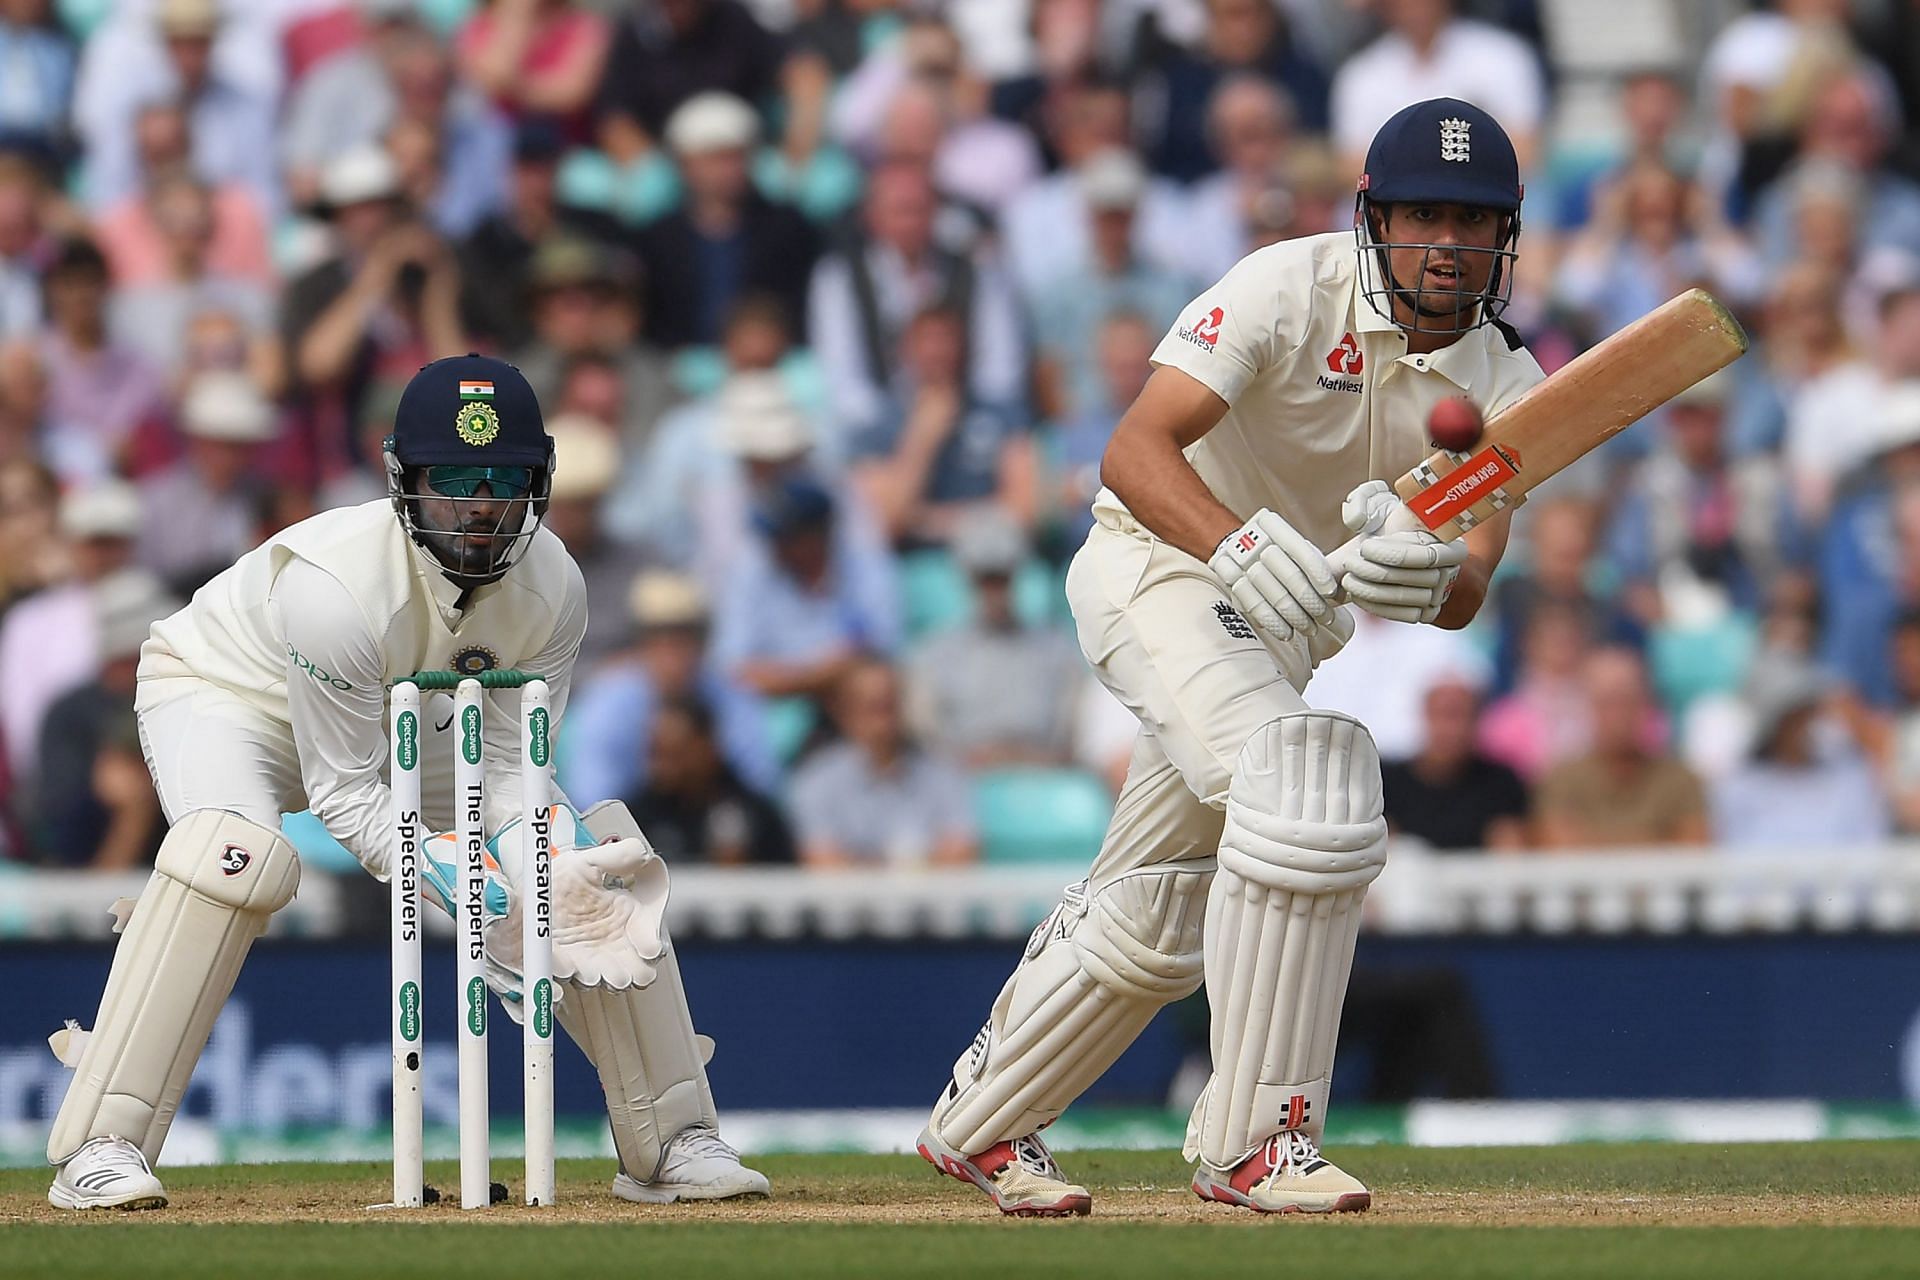 Alastair Cook loved batting against Team India. Pic: Getty Images